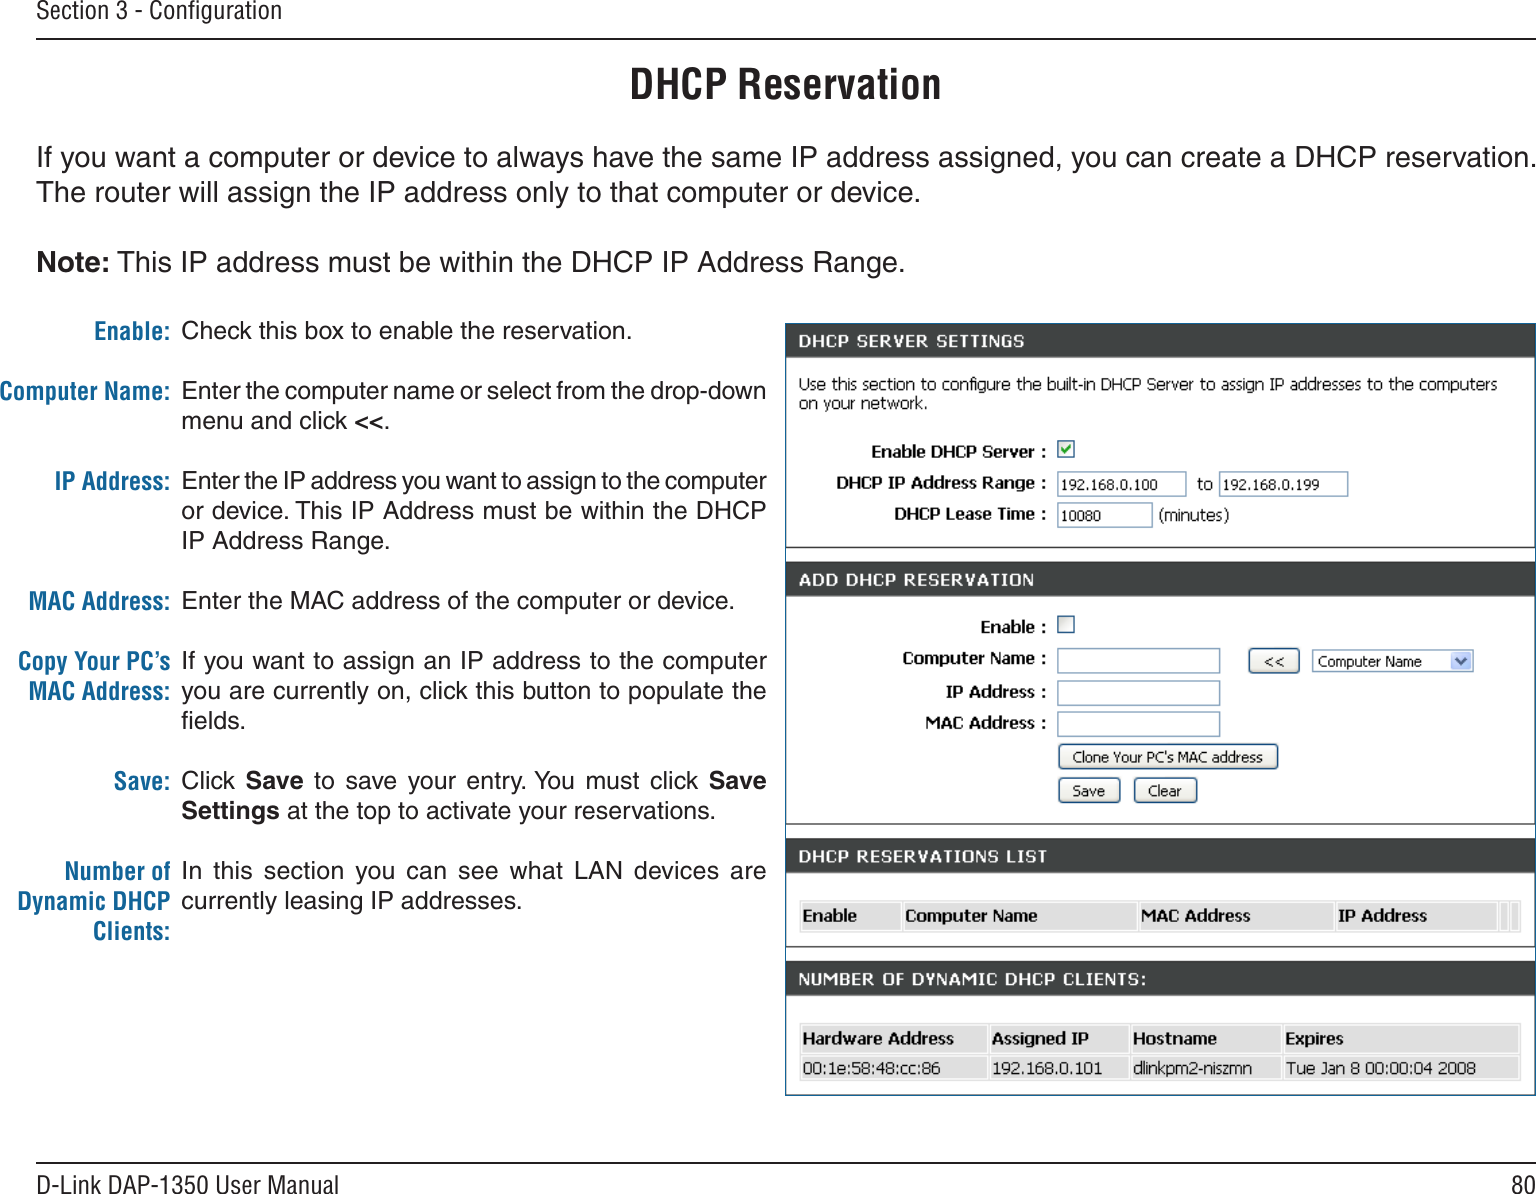 80D-Link DAP-1350 User ManualSection 3 - ConﬁgurationDHCP ReservationIf you want a computer or device to always have the same IP address assigned, you can create a DHCP reservation. The router will assign the IP address only to that computer or device. Note: This IP address must be within the DHCP IP Address Range.Check this box to enable the reservation.Enter the computer name or select from the drop-down menu and click &lt;&lt;.Enter the IP address you want to assign to the computer or device. This IP Address must be within the DHCP IP Address Range.Enter the MAC address of the computer or device.If you want to assign an IP address to the computer you are currently on, click this button to populate the ﬁelds. Click Save  to  save  your  entry. You  must  click  Save Settings at the top to activate your reservations. In  this  section  you  can  see  what  LAN  devices  are currently leasing IP addresses.Enable:Computer Name:IP Address:MAC Address:Copy Your PC’s MAC Address:Save:Number of Dynamic DHCP Clients: